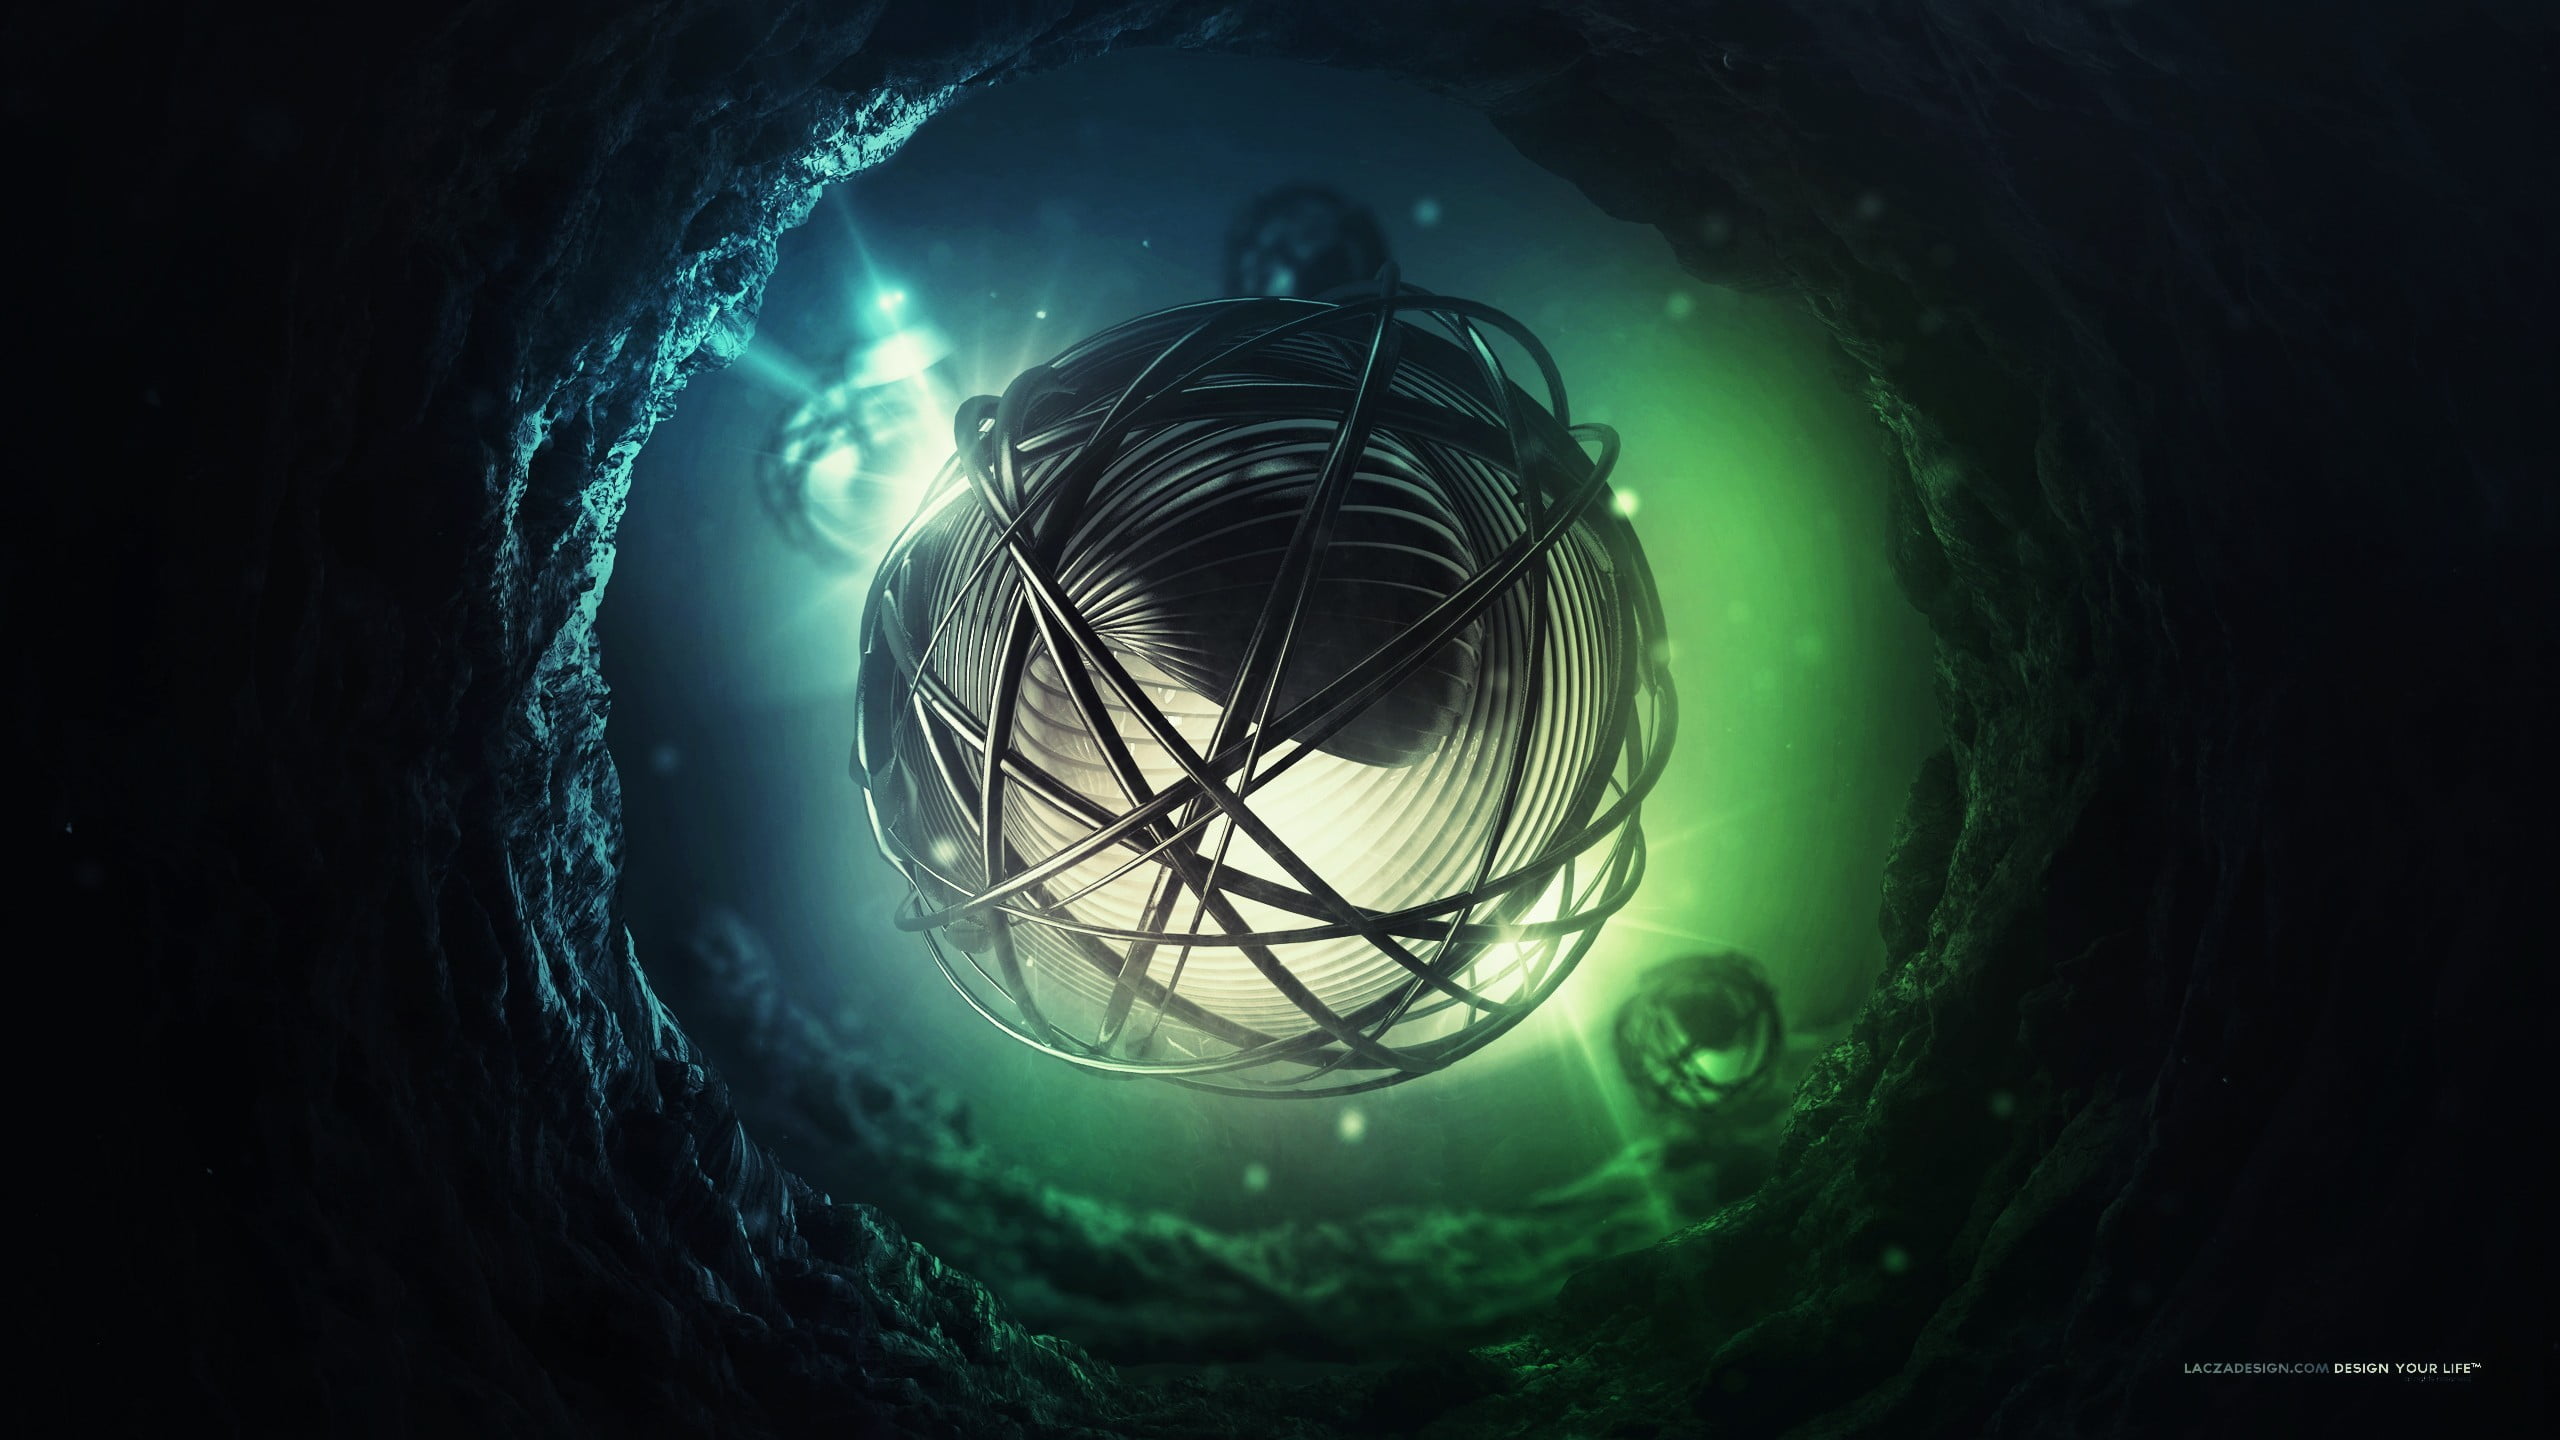 green and blue ball illustration, Lacza, digital art, sphere, abstract